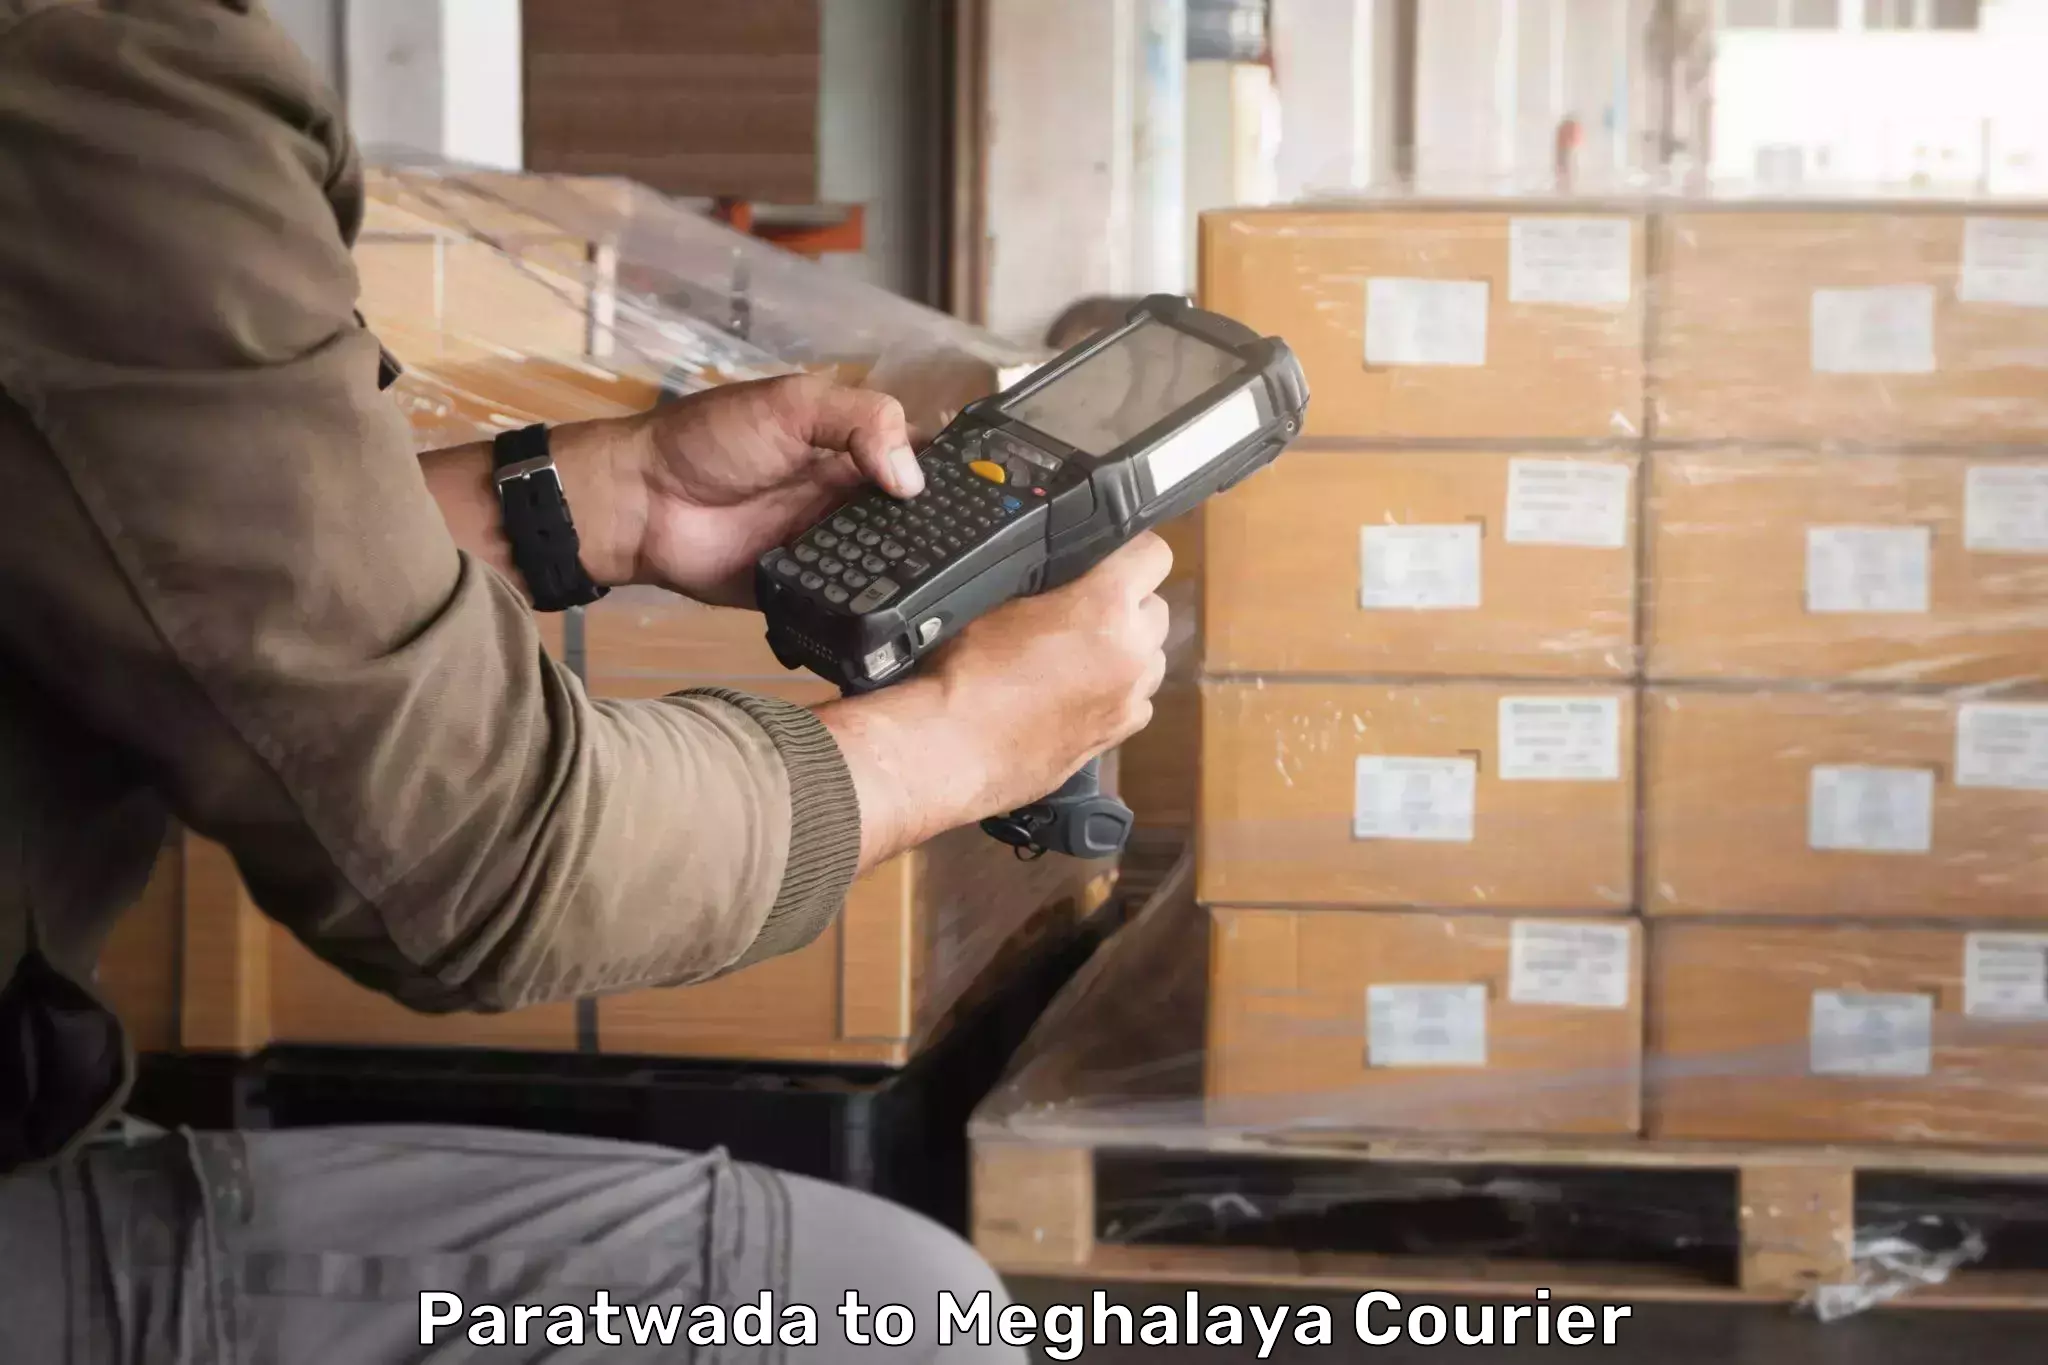 Reliable courier service Paratwada to Meghalaya